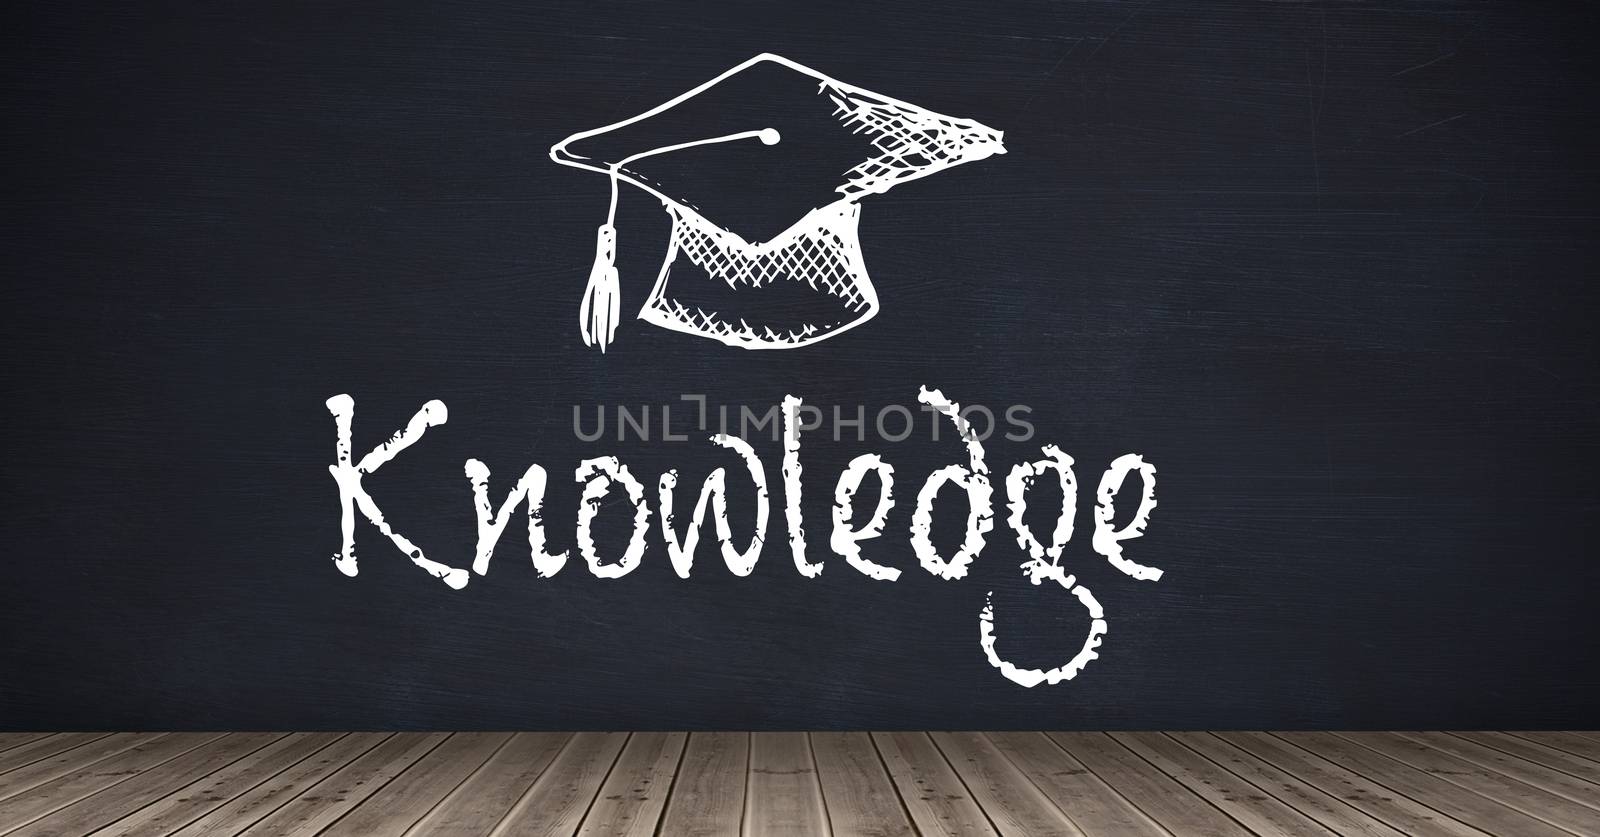 Digital composite of Knowledge text and graduation education hat on blackboard